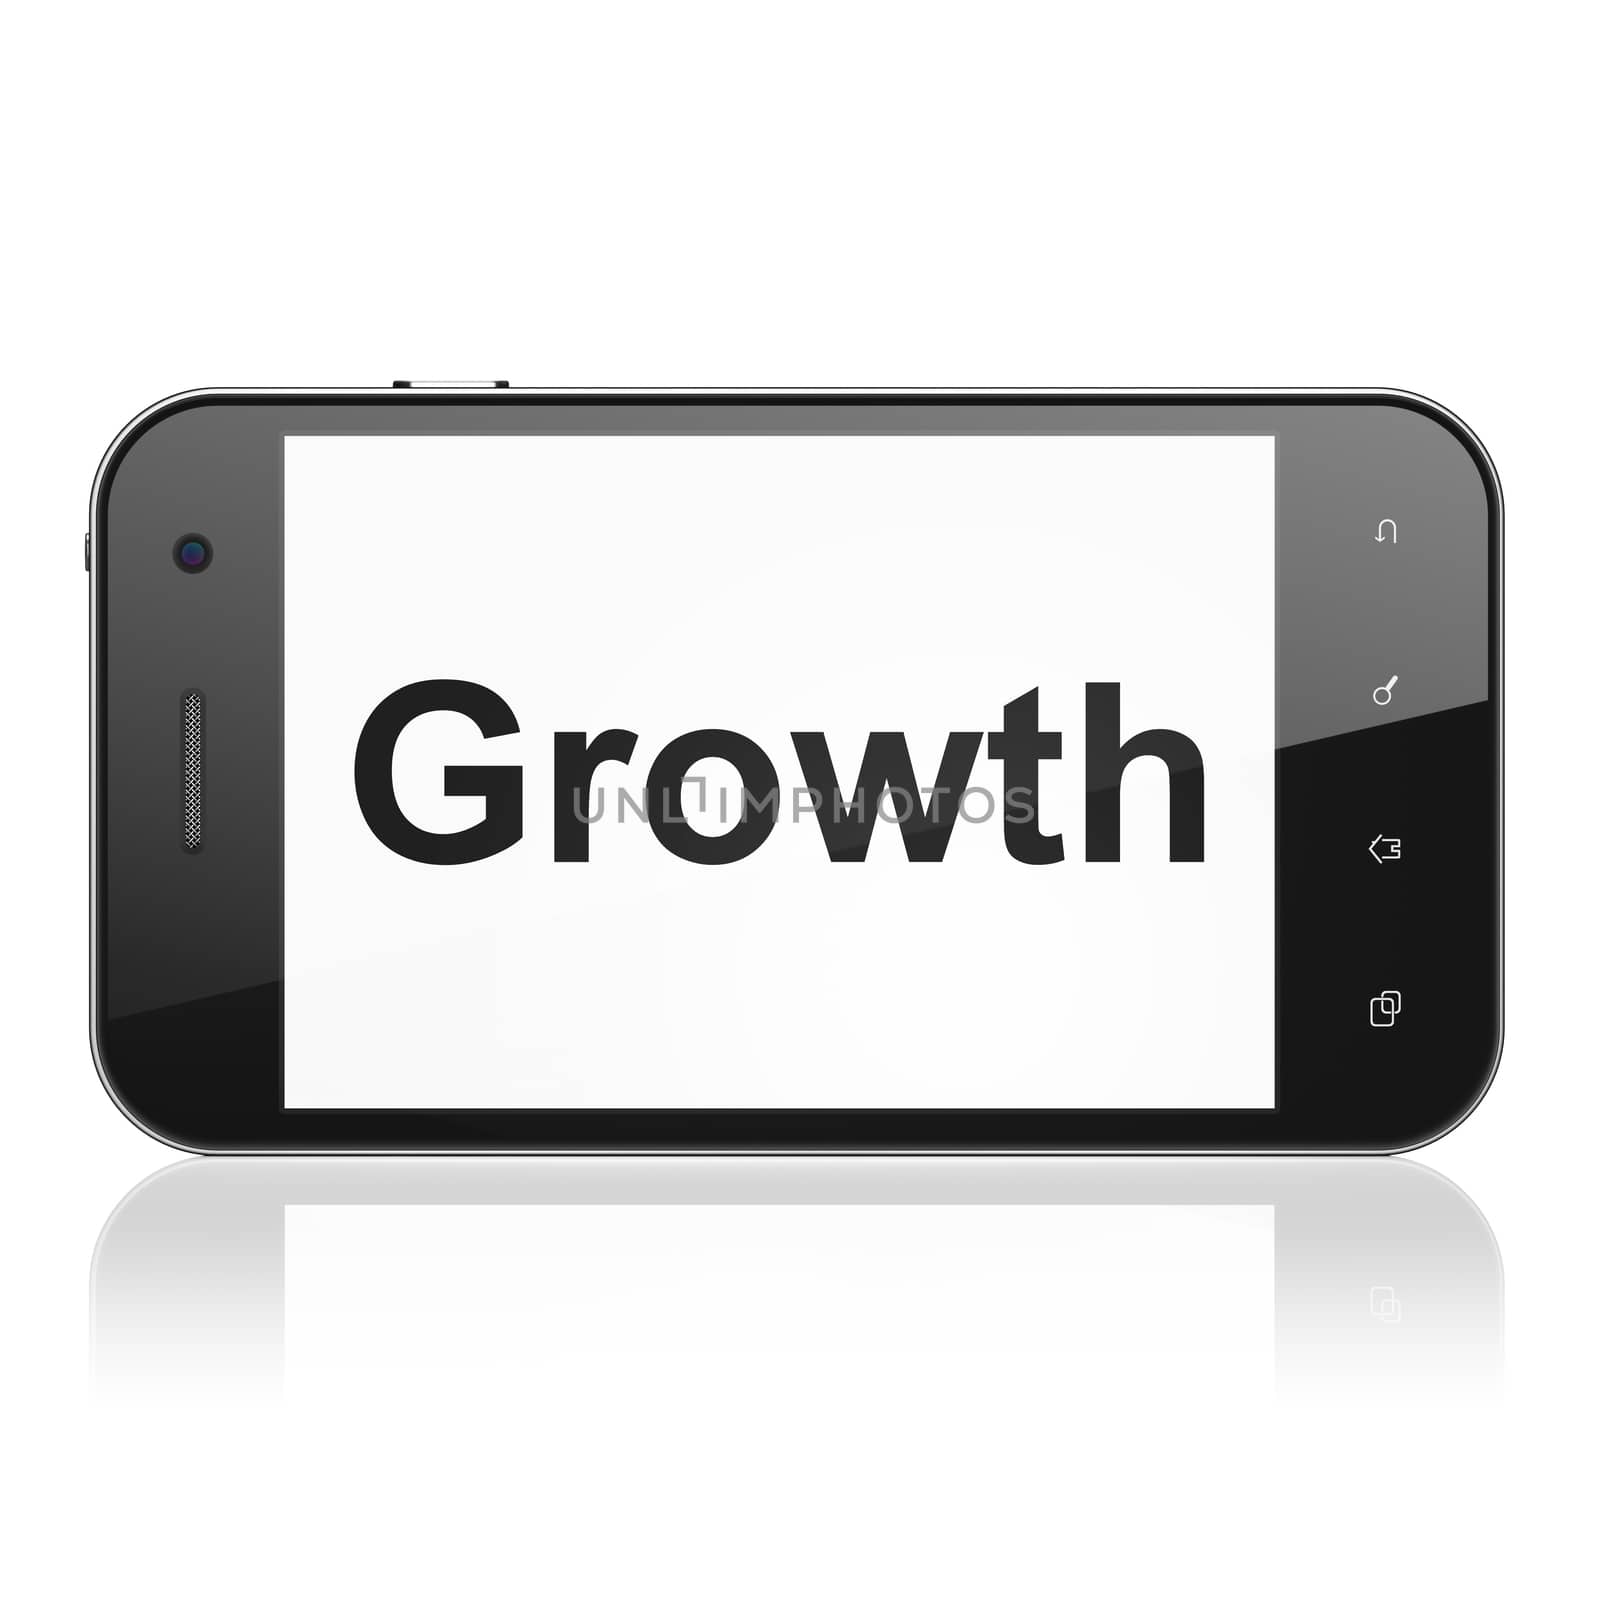 Business concept: Growth on smartphone by maxkabakov